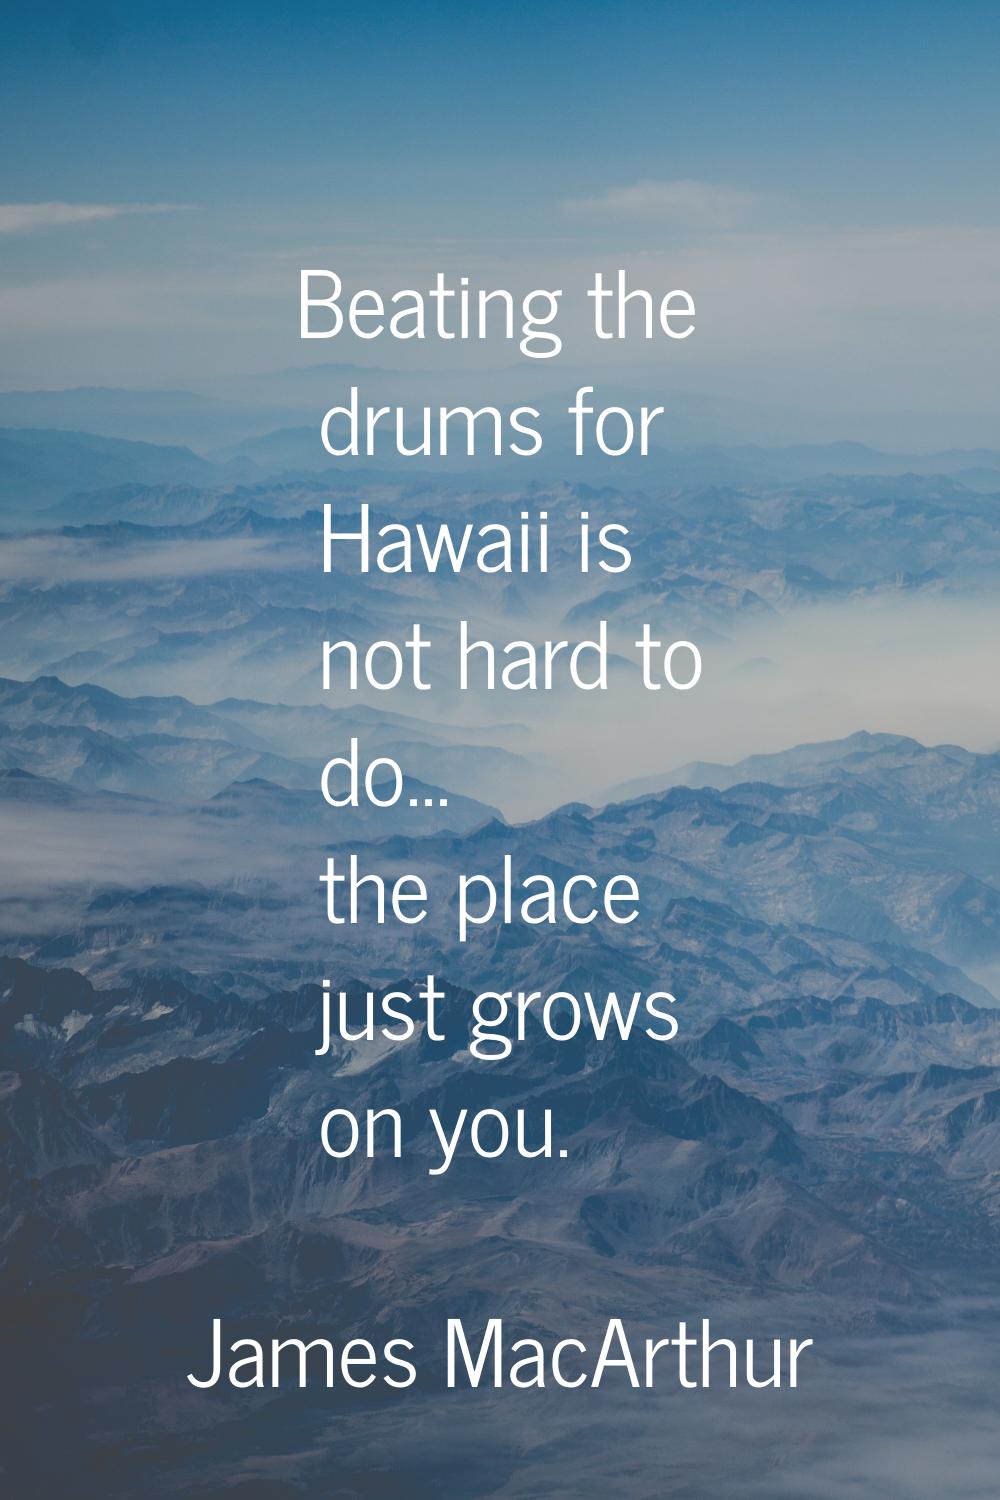 Beating the drums for Hawaii is not hard to do... the place just grows on you.